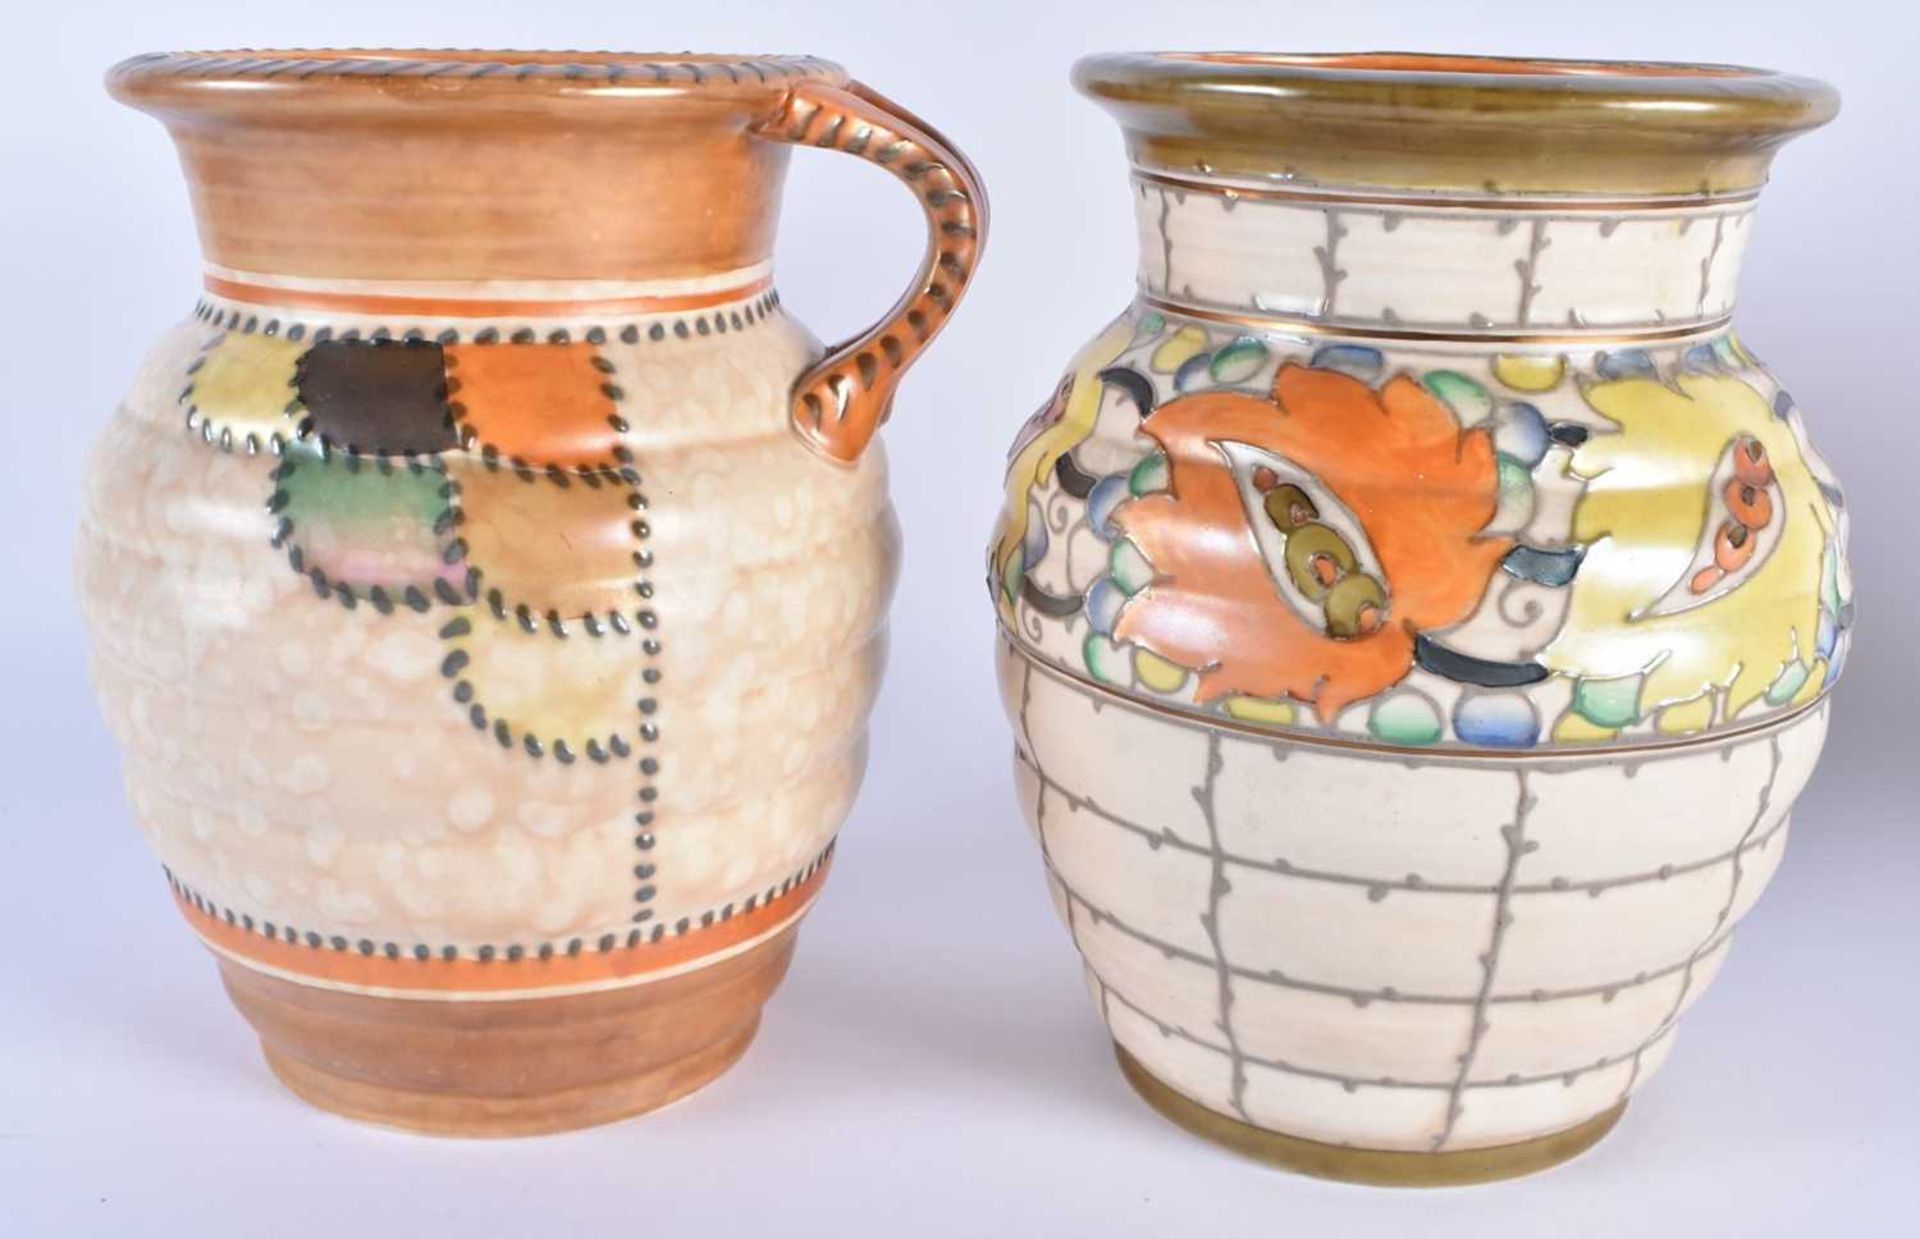 THREE LARGE ART DECO ENGLISH POTTERY VASES together with a ewer, bursley ware etc. Largest 38.5 cm - Image 2 of 8